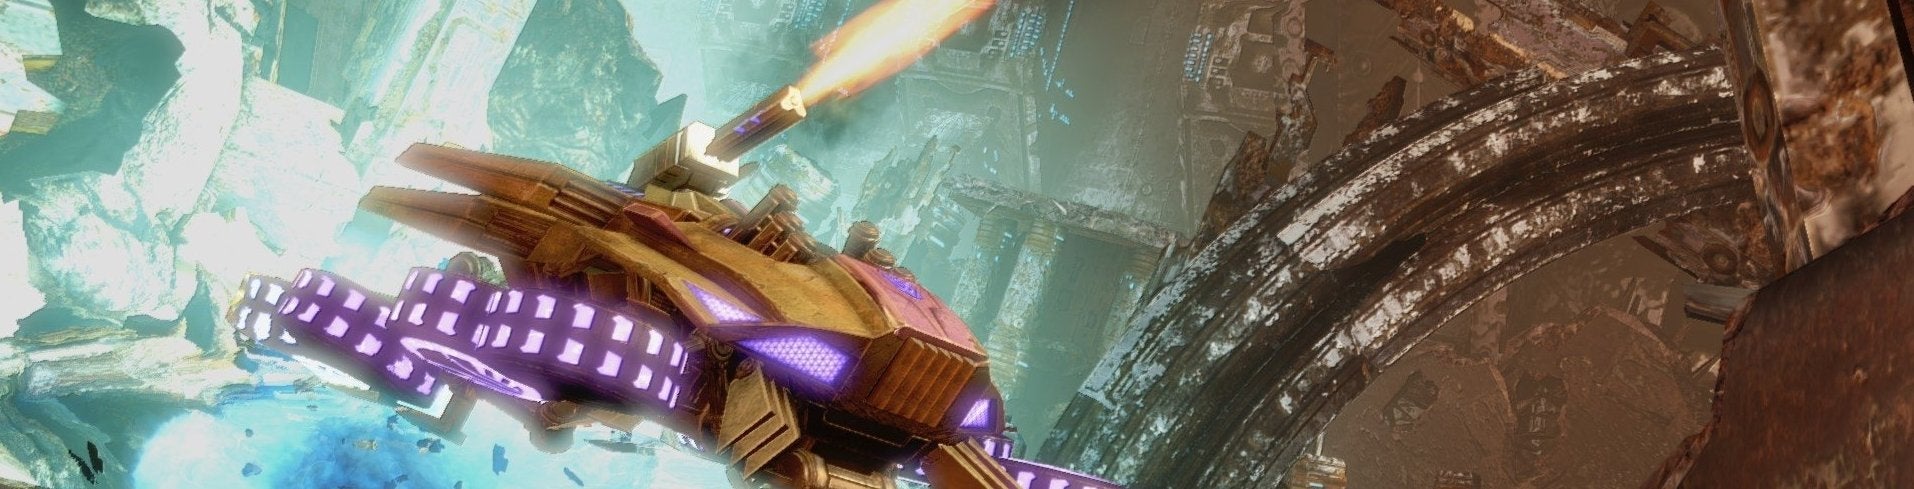 Image for Transformers: Rise of the Dark Spark review